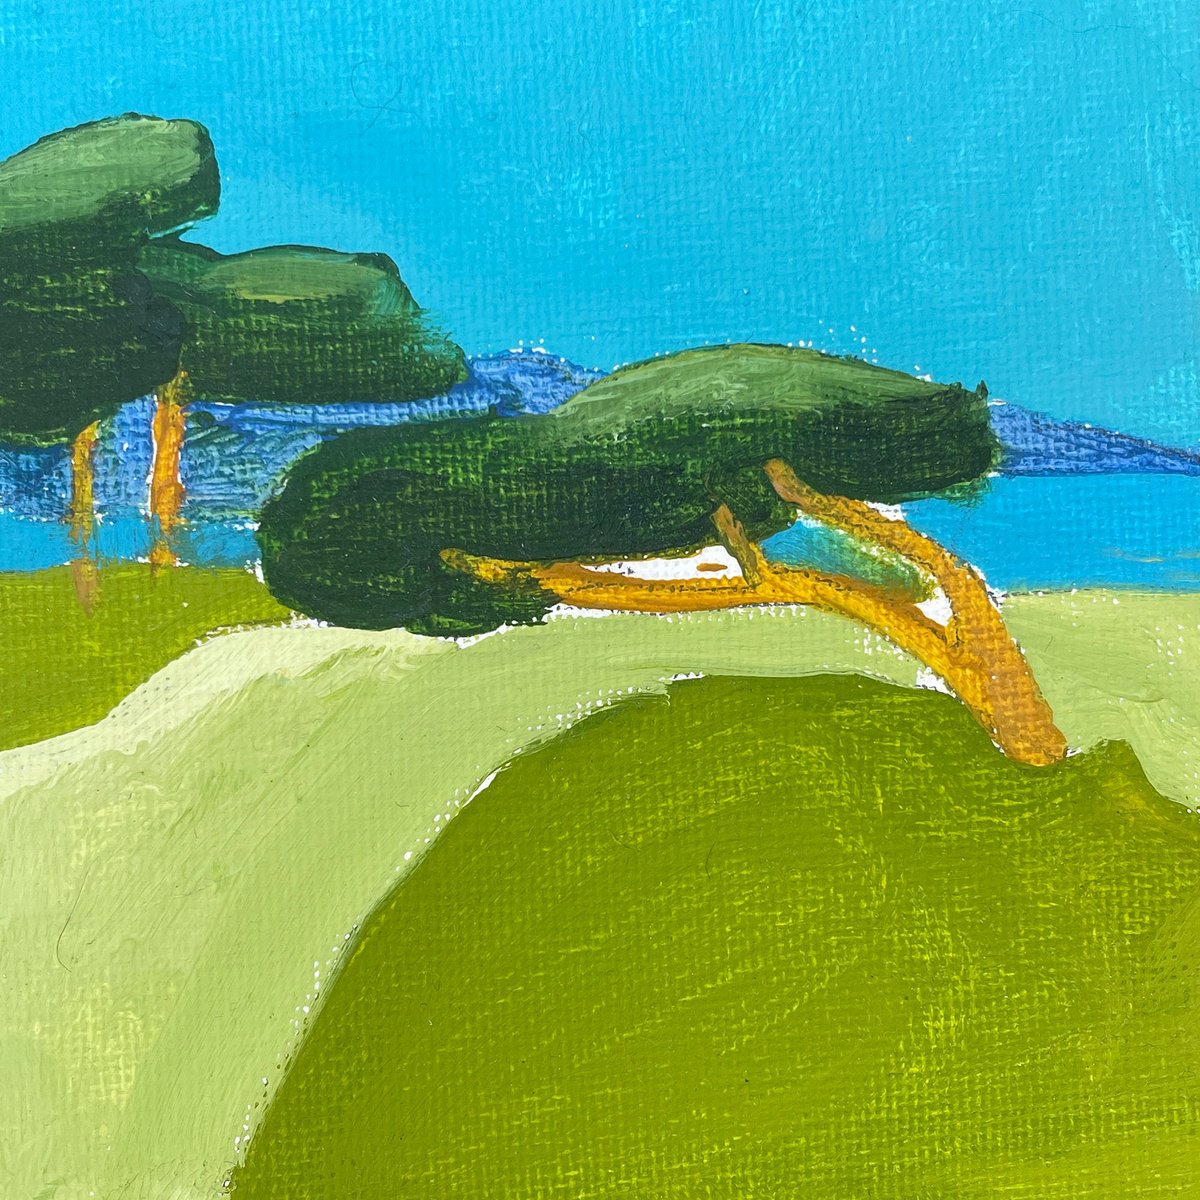 Pines on the Spanish coast - 10x10 cm by Victoria Dael